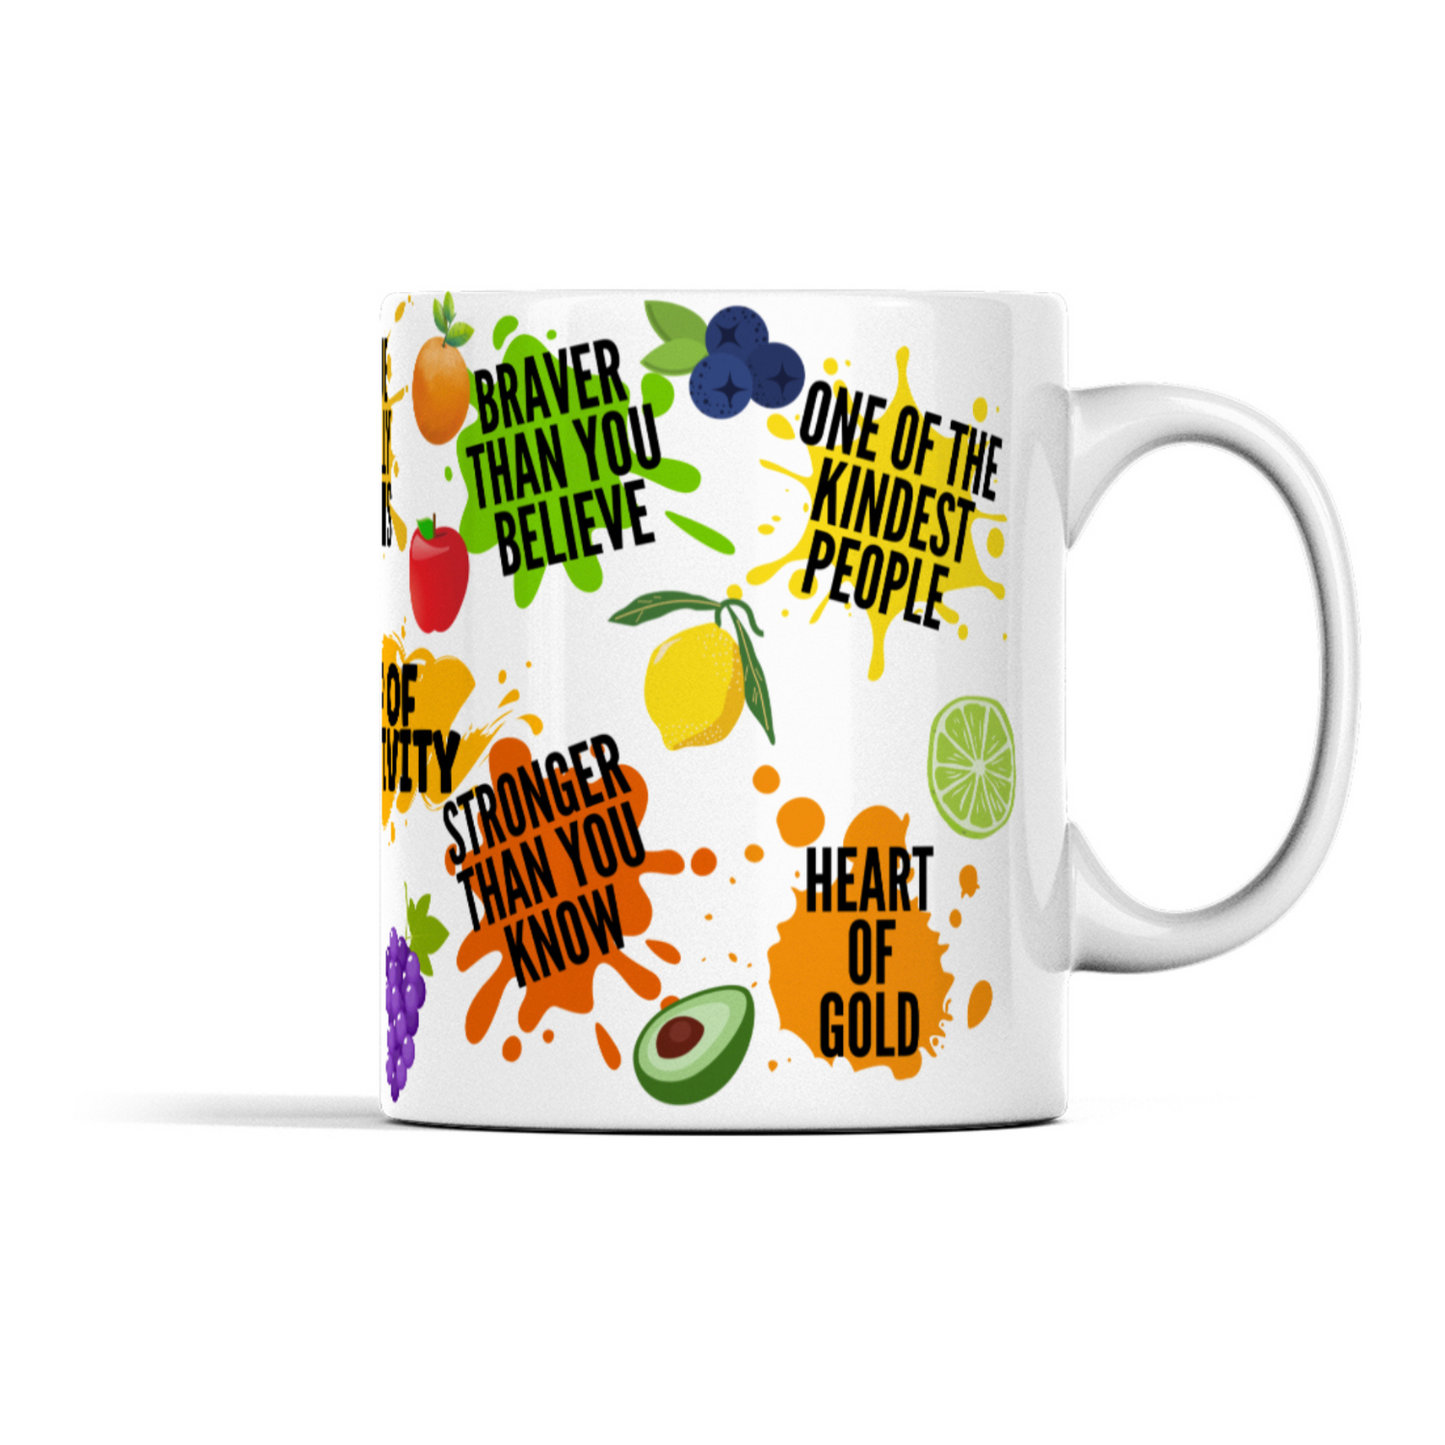 Positive affirmation quotes "cup of positivity" sentimental coffee mug